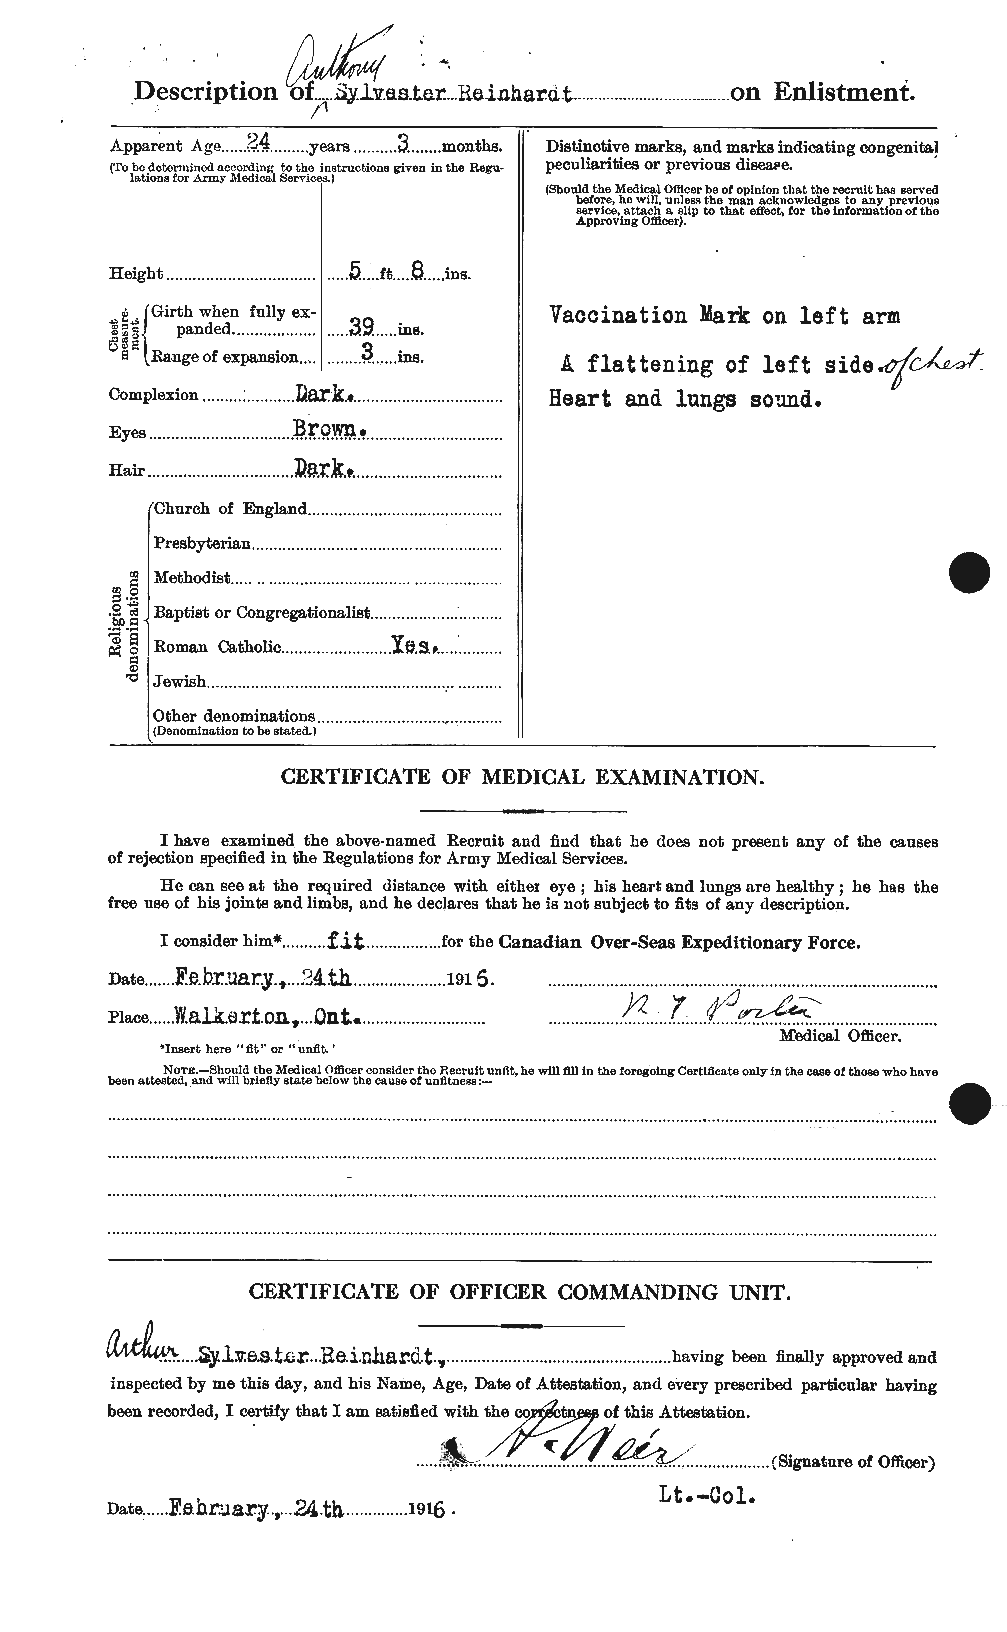 Personnel Records of the First World War - CEF 599367b